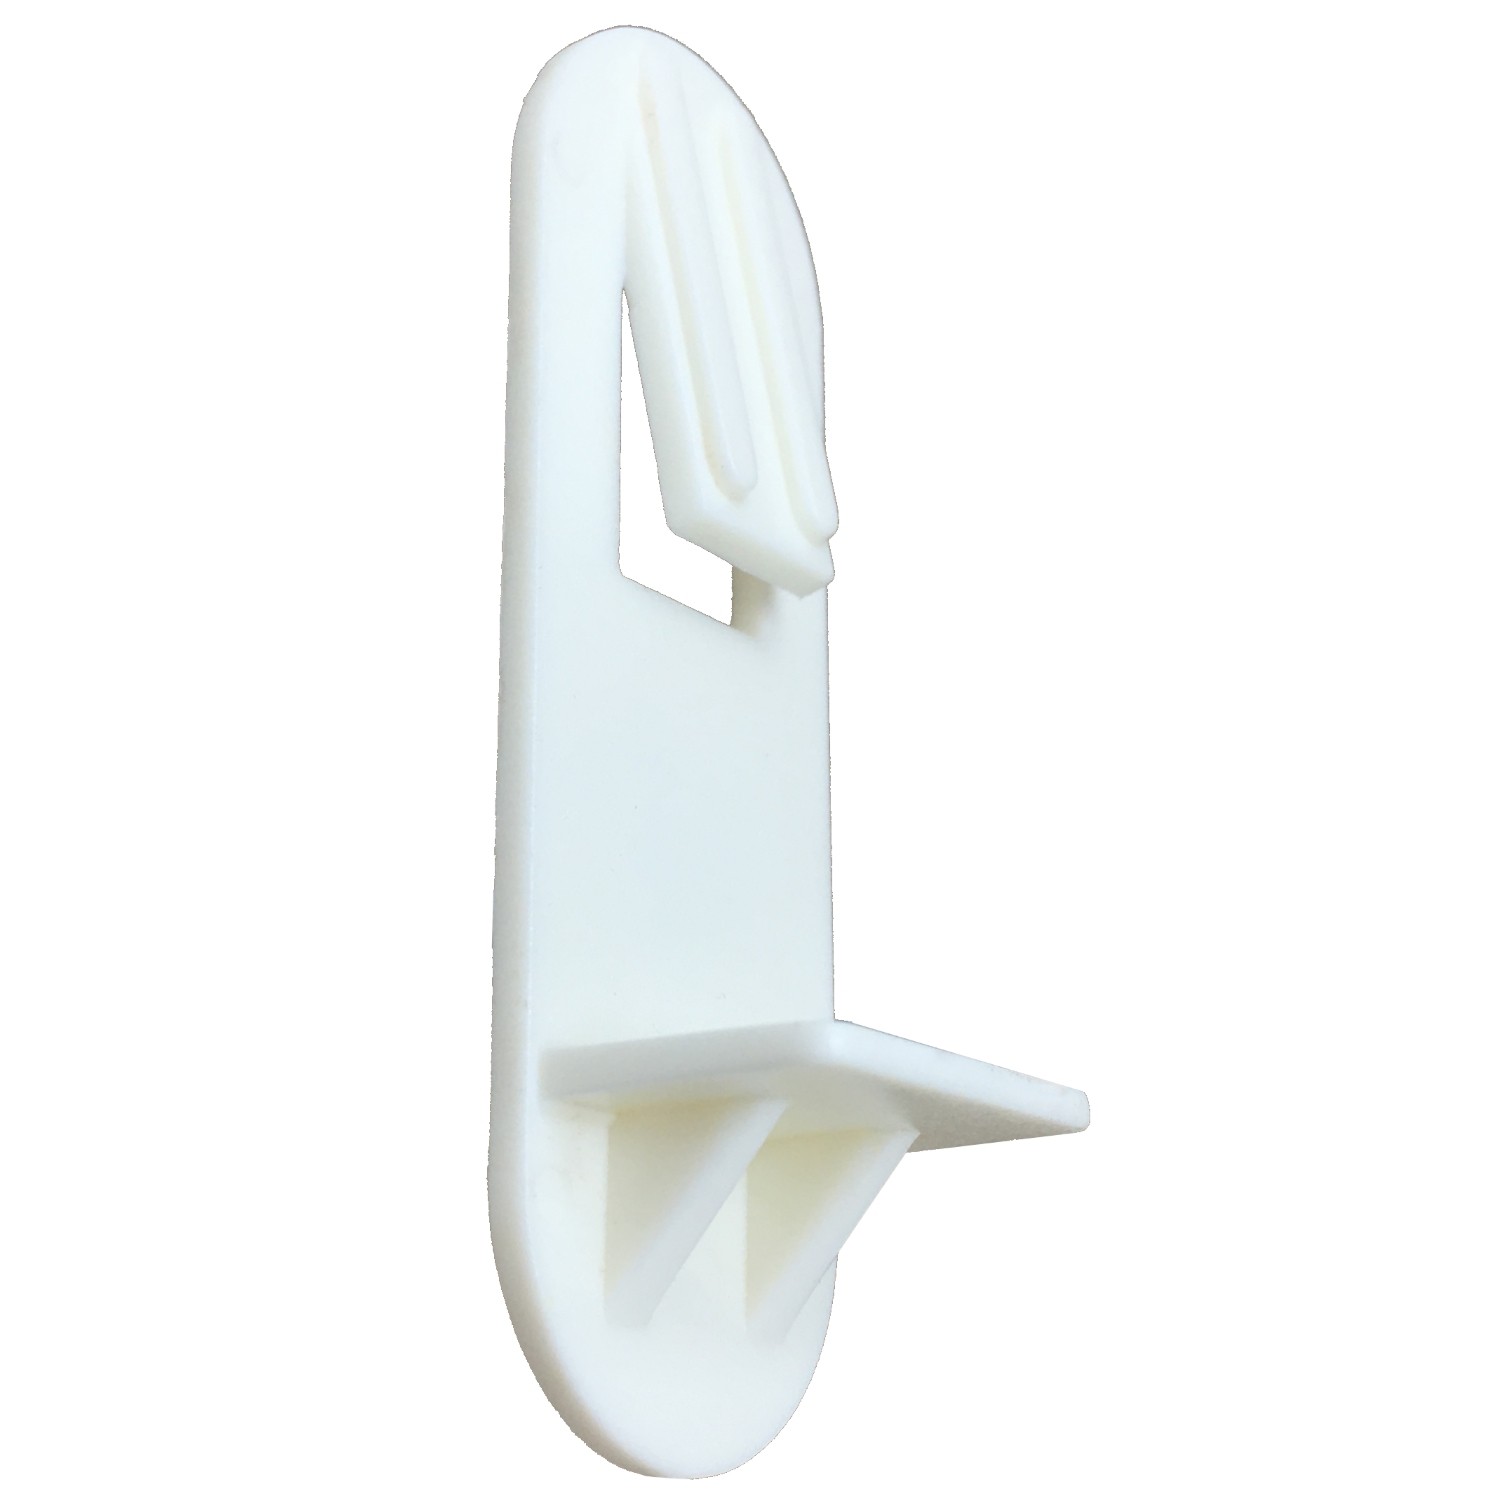 1/4" SelfLocking Shelf Support Pegs for 5/8" Thick Shelves White